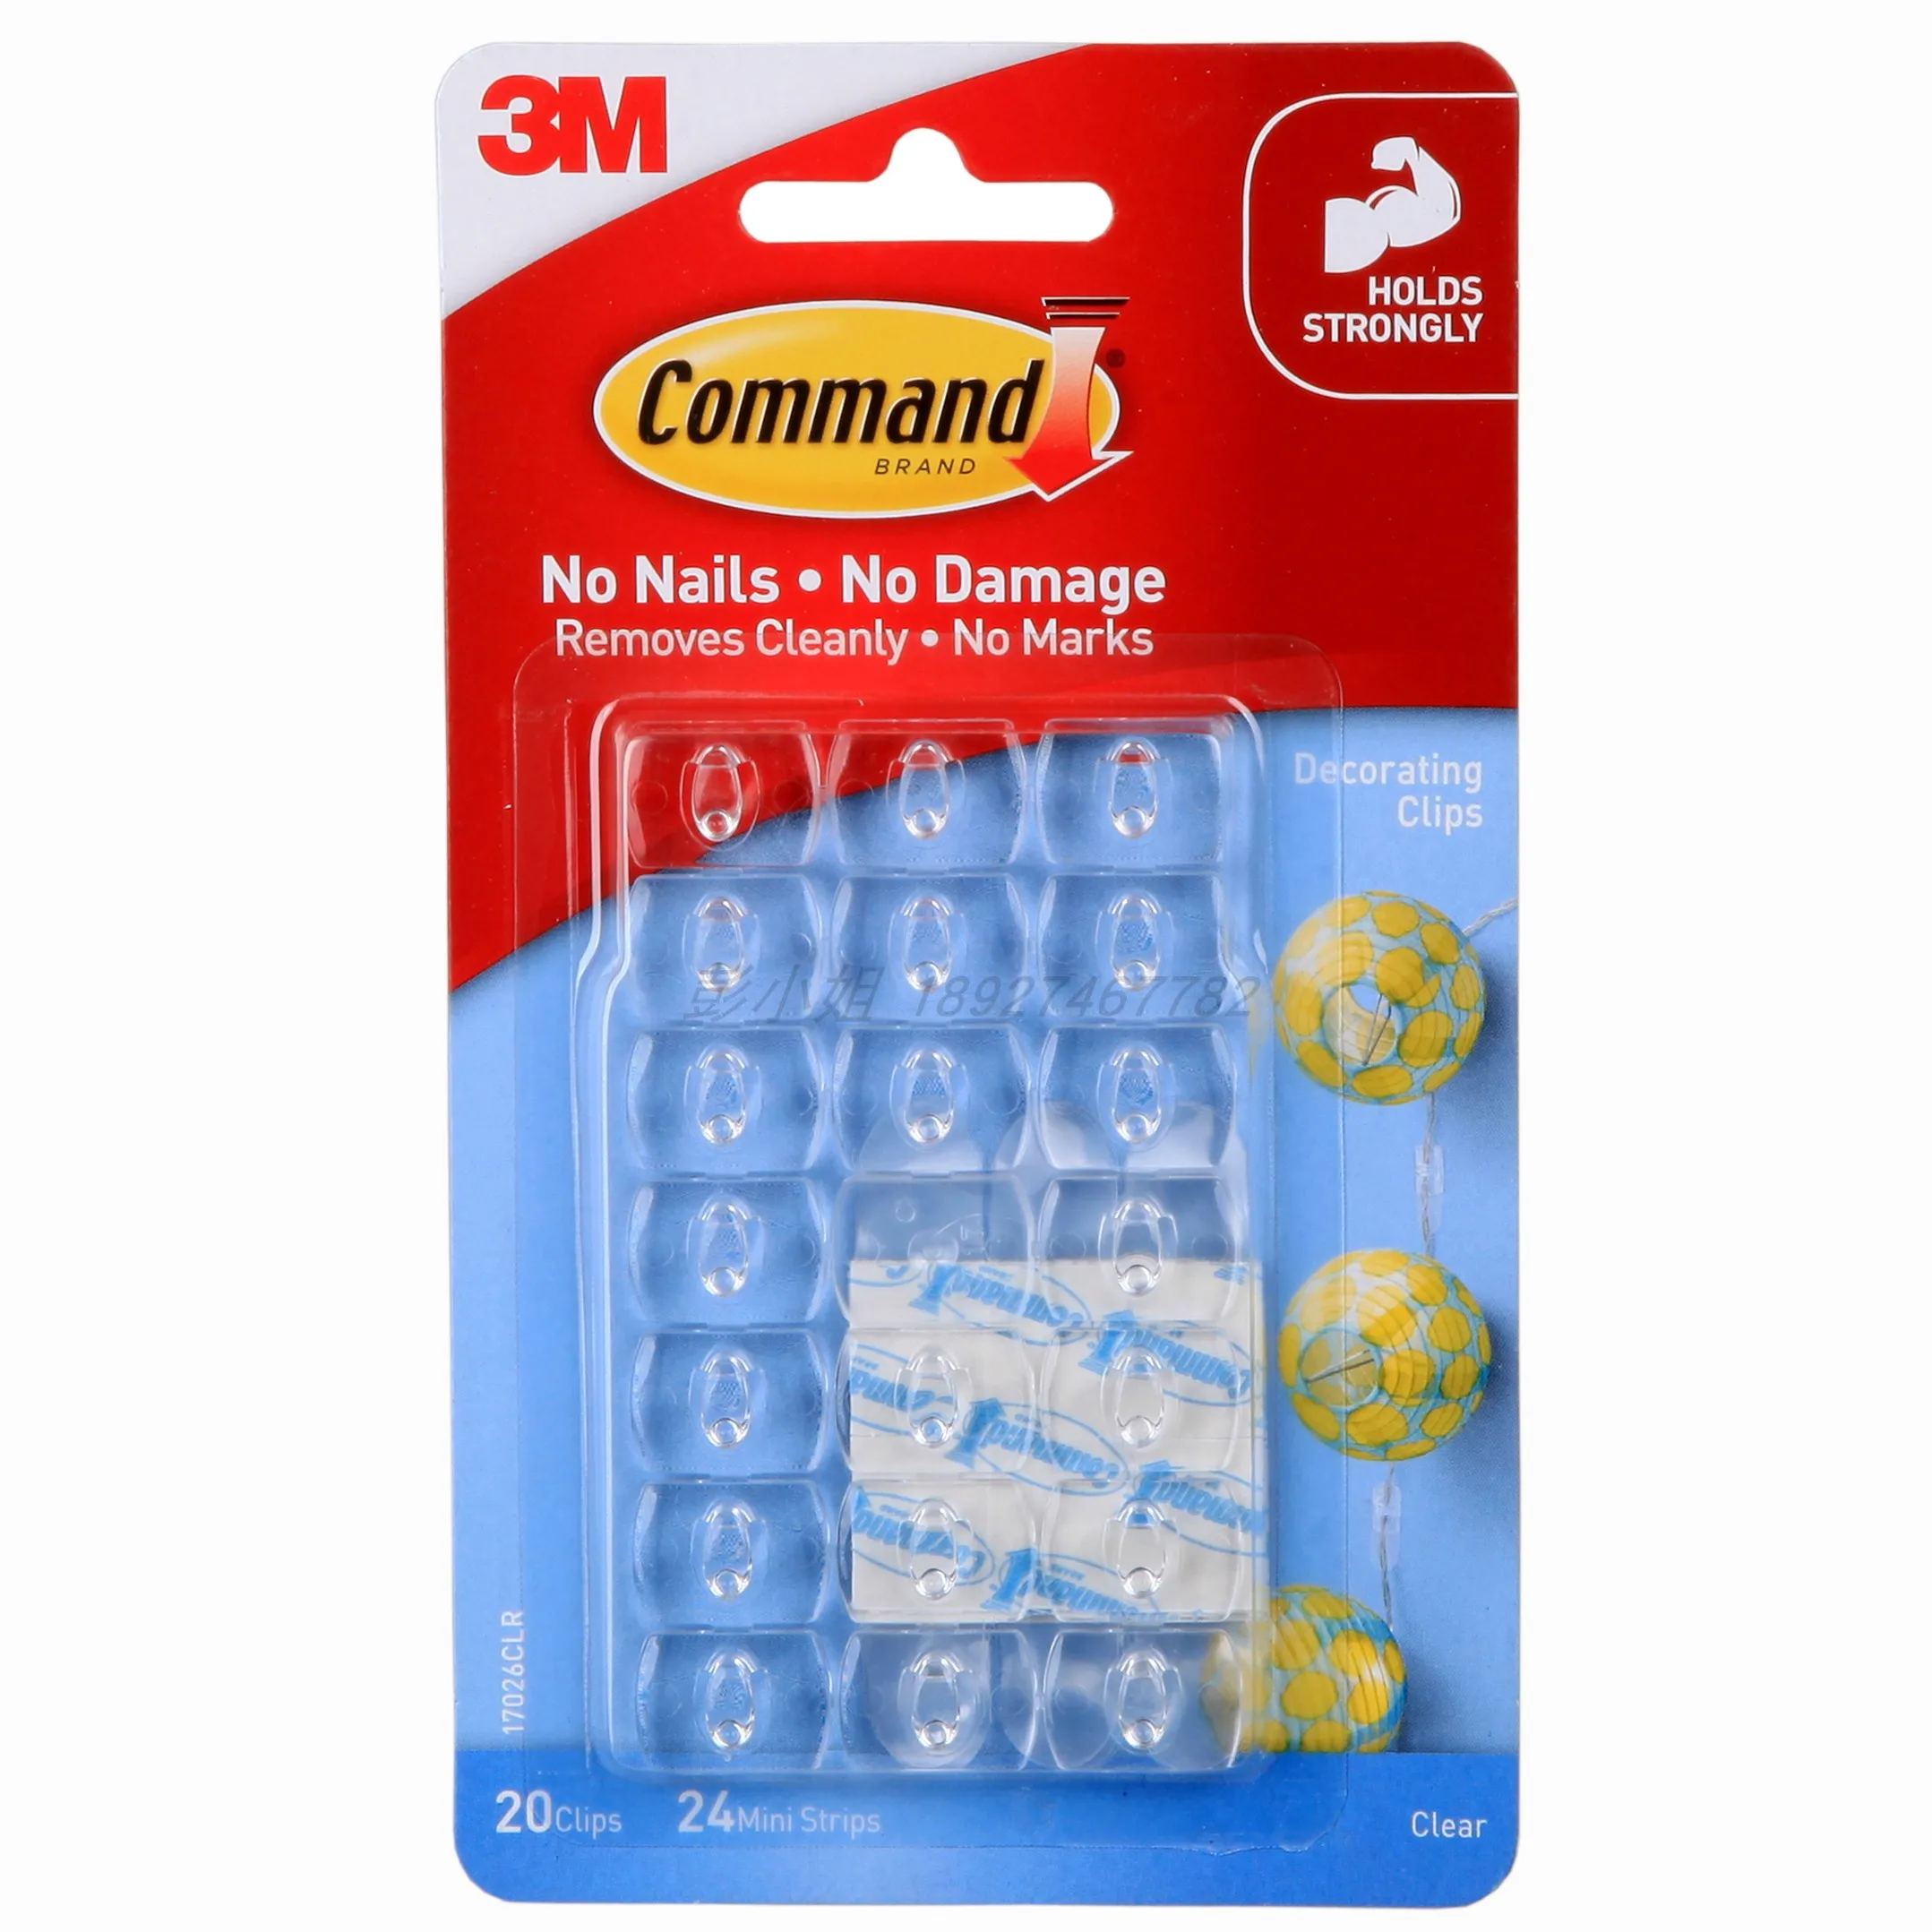 3m Command Decorating Hooks Clear  3m Command Decorating Clips - 3m Damage-free  - Aliexpress